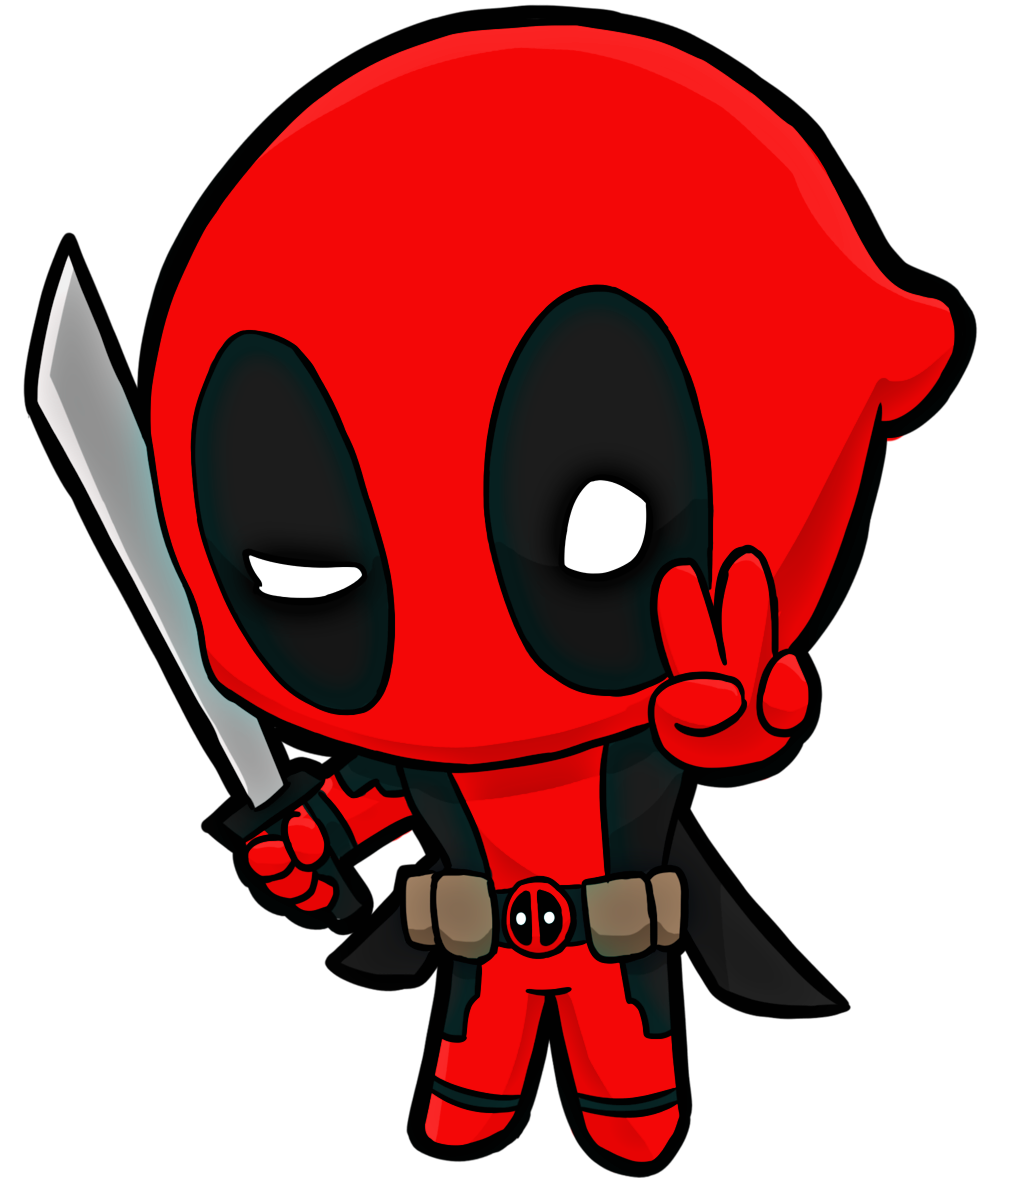 Download Deadpool clipart animated, Deadpool animated Transparent ...